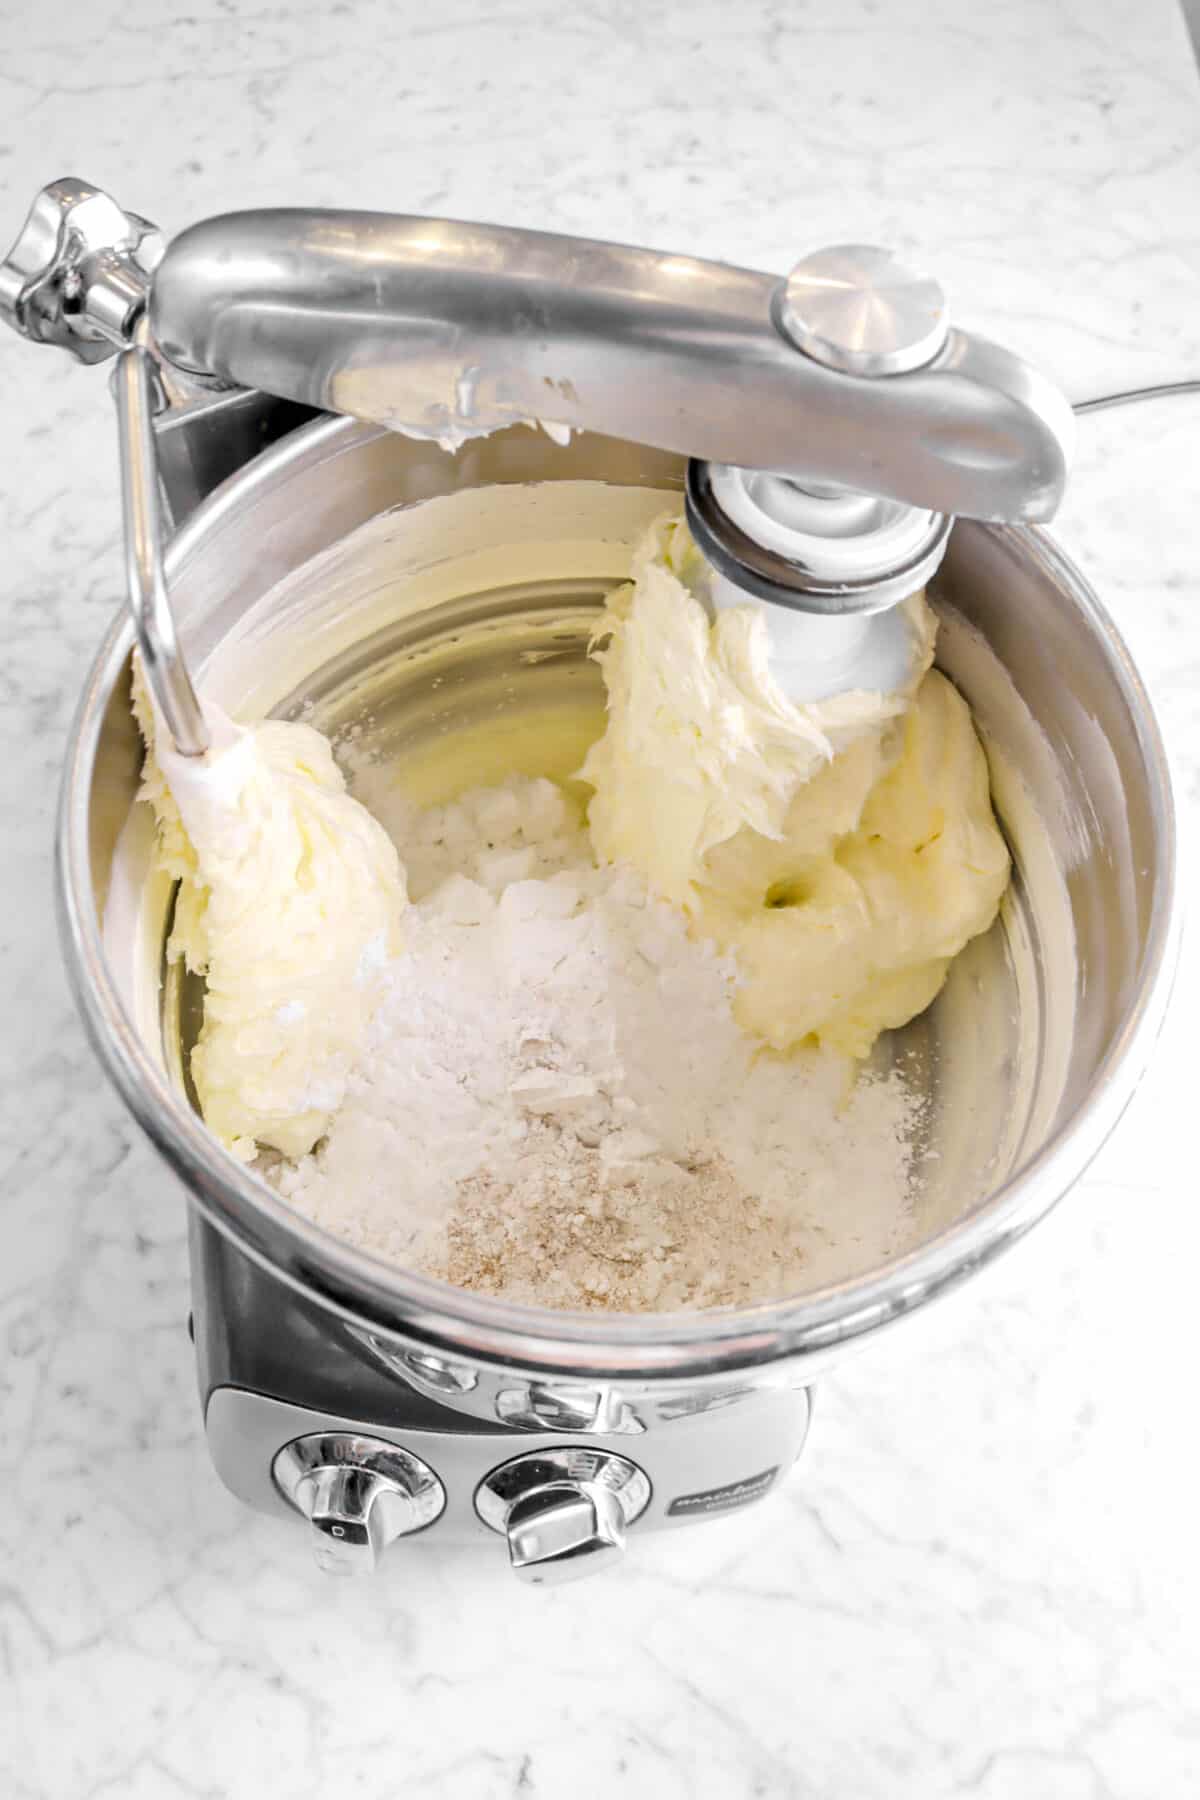 Powdered sugar mixture added to butter